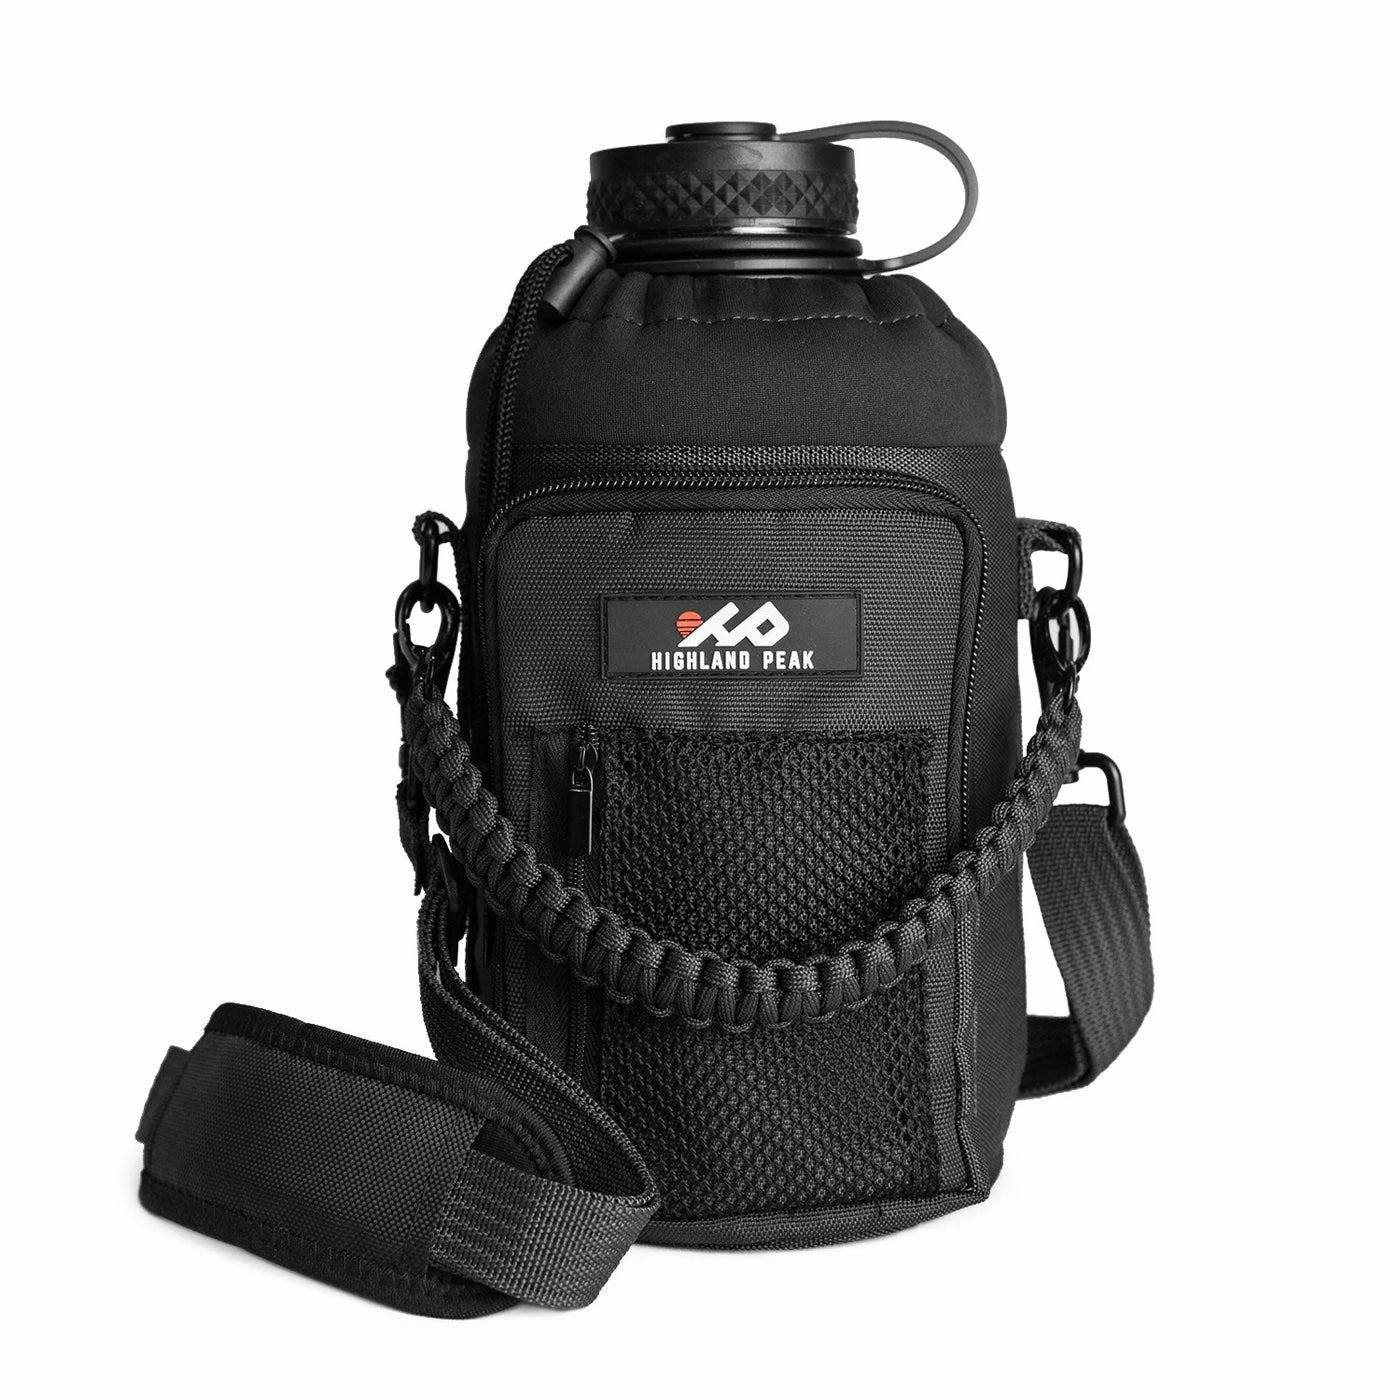 32 oz Sleeve/Carrier with Paracord Survival Handle (Blue)